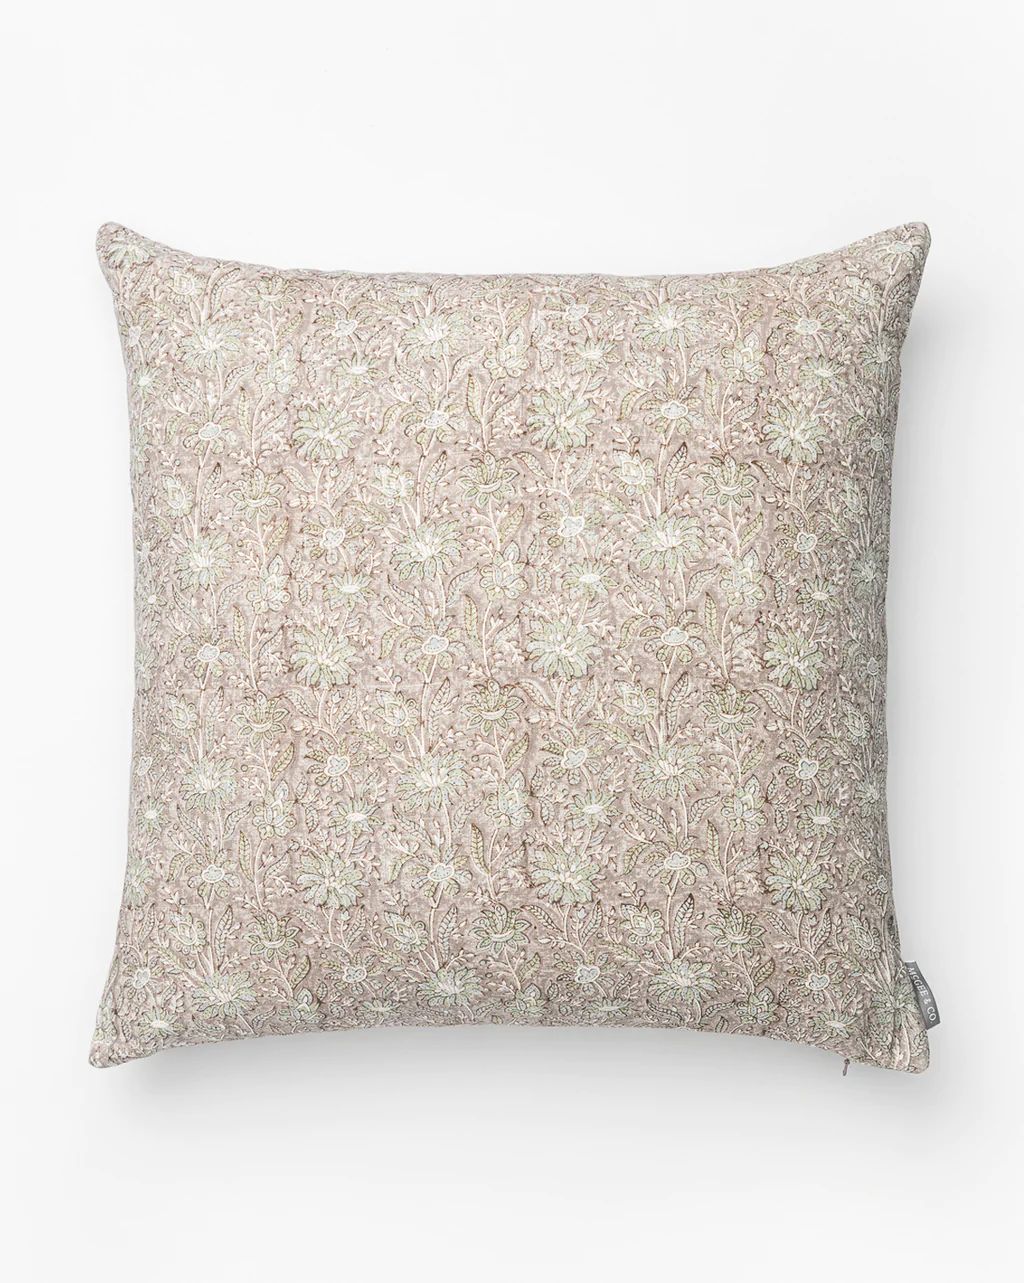 Coming Soon: Opal Pillow Cover | McGee & Co.